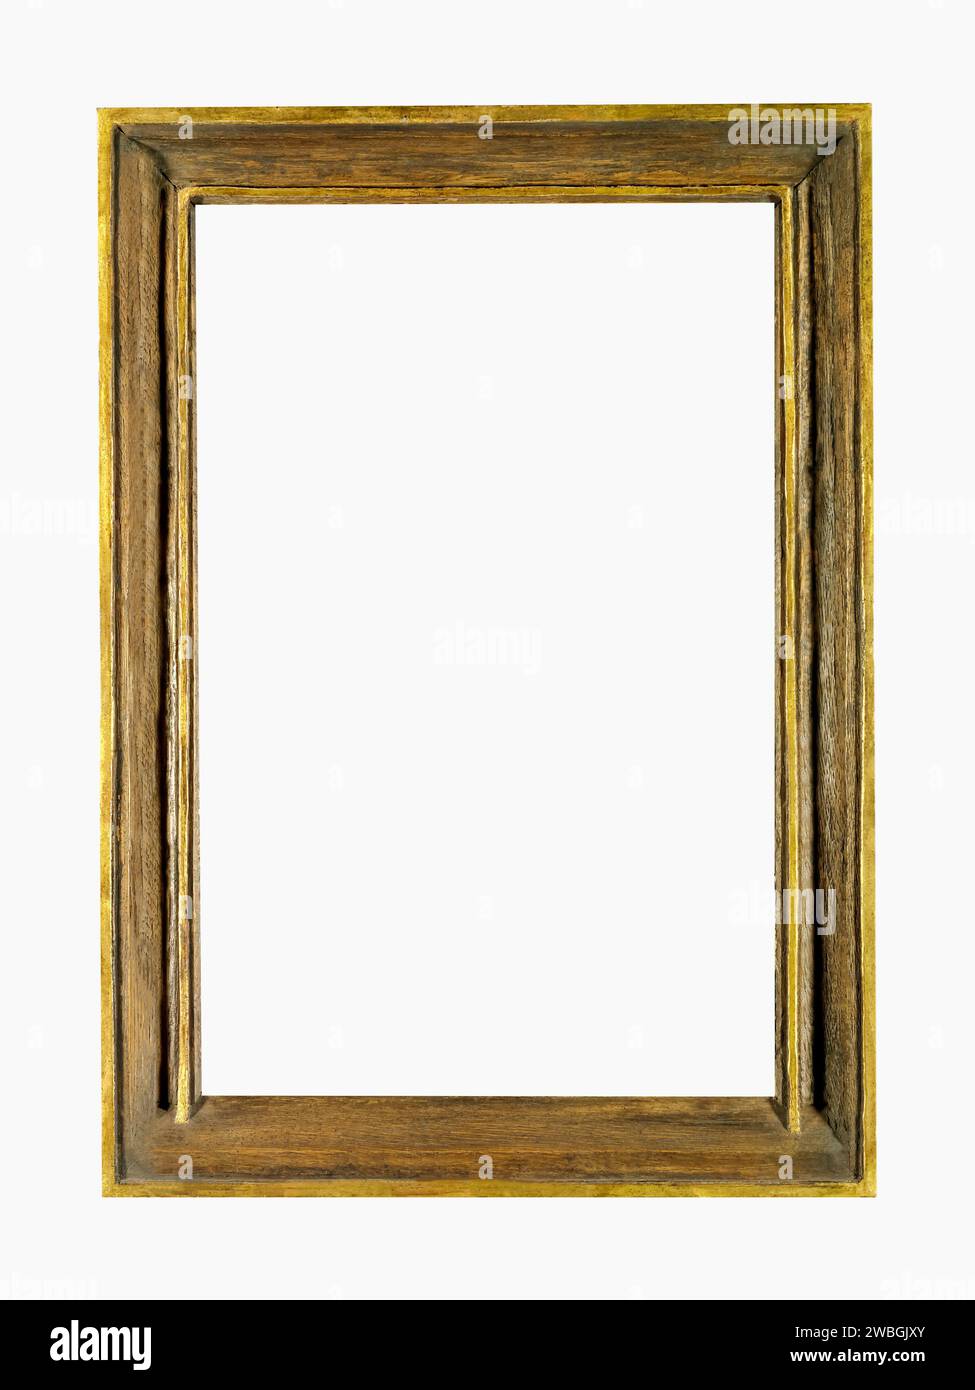 Wooden distressed dirty grunge brown yellow gold photo frame old dirty scratched Stock Photo